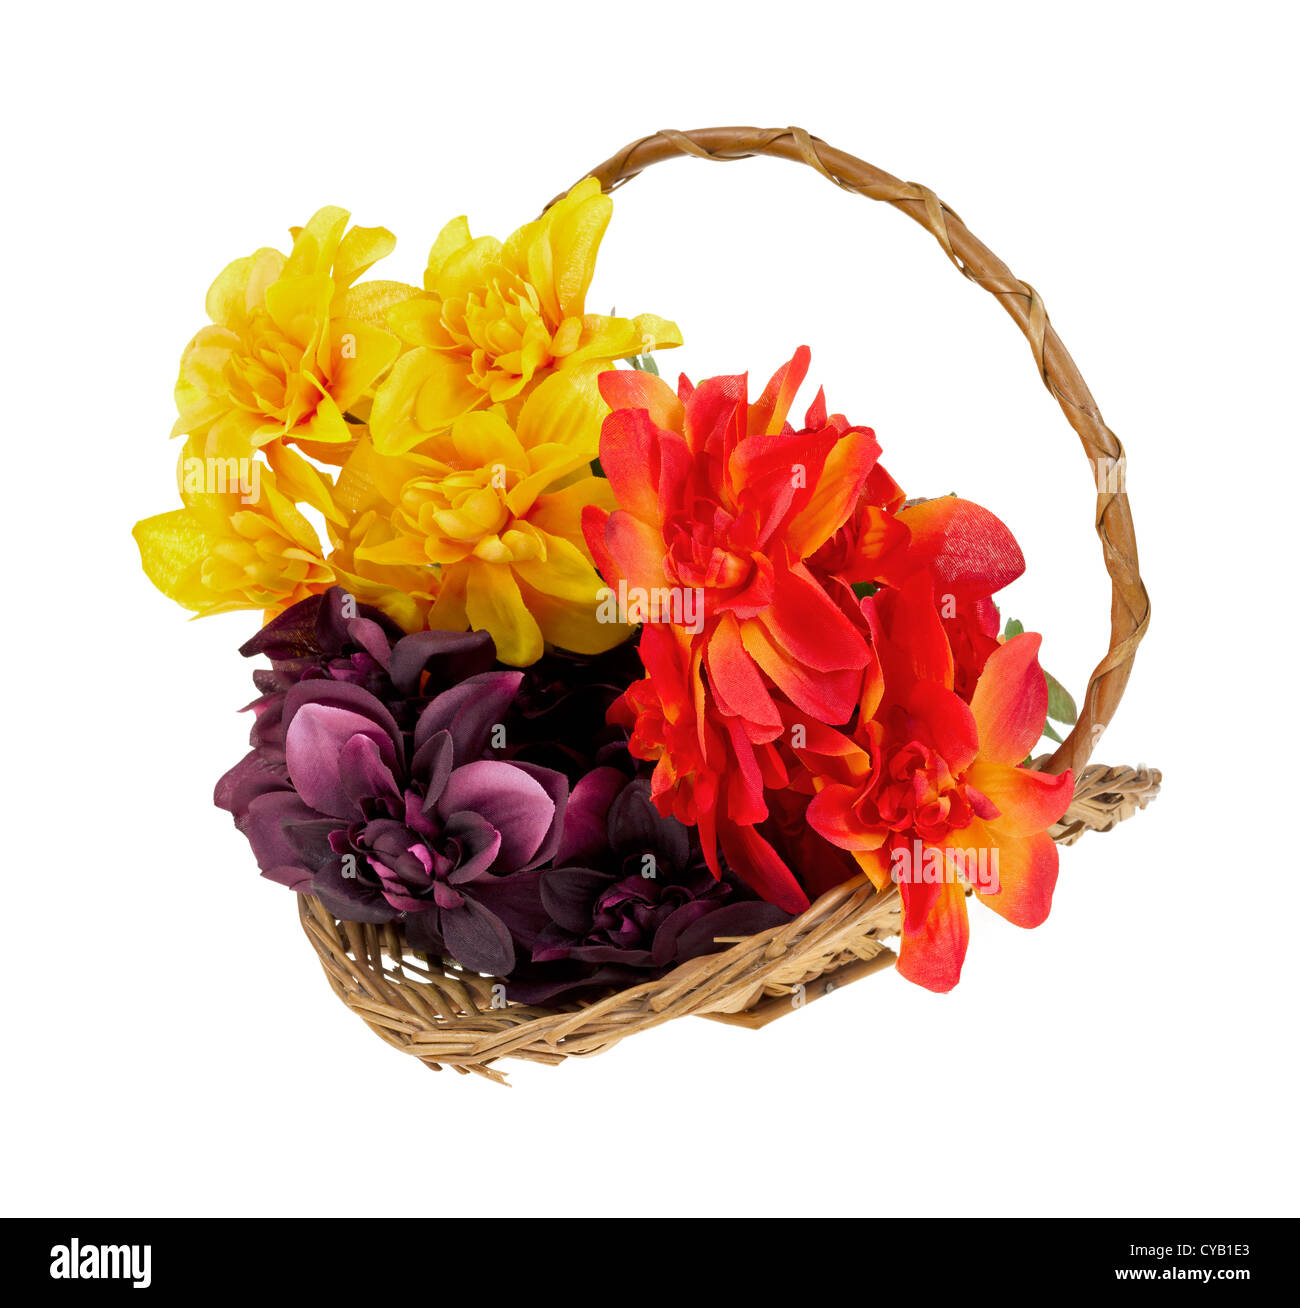 A small wicker basket filled with colorful artificial flowers on a white background. Stock Photo